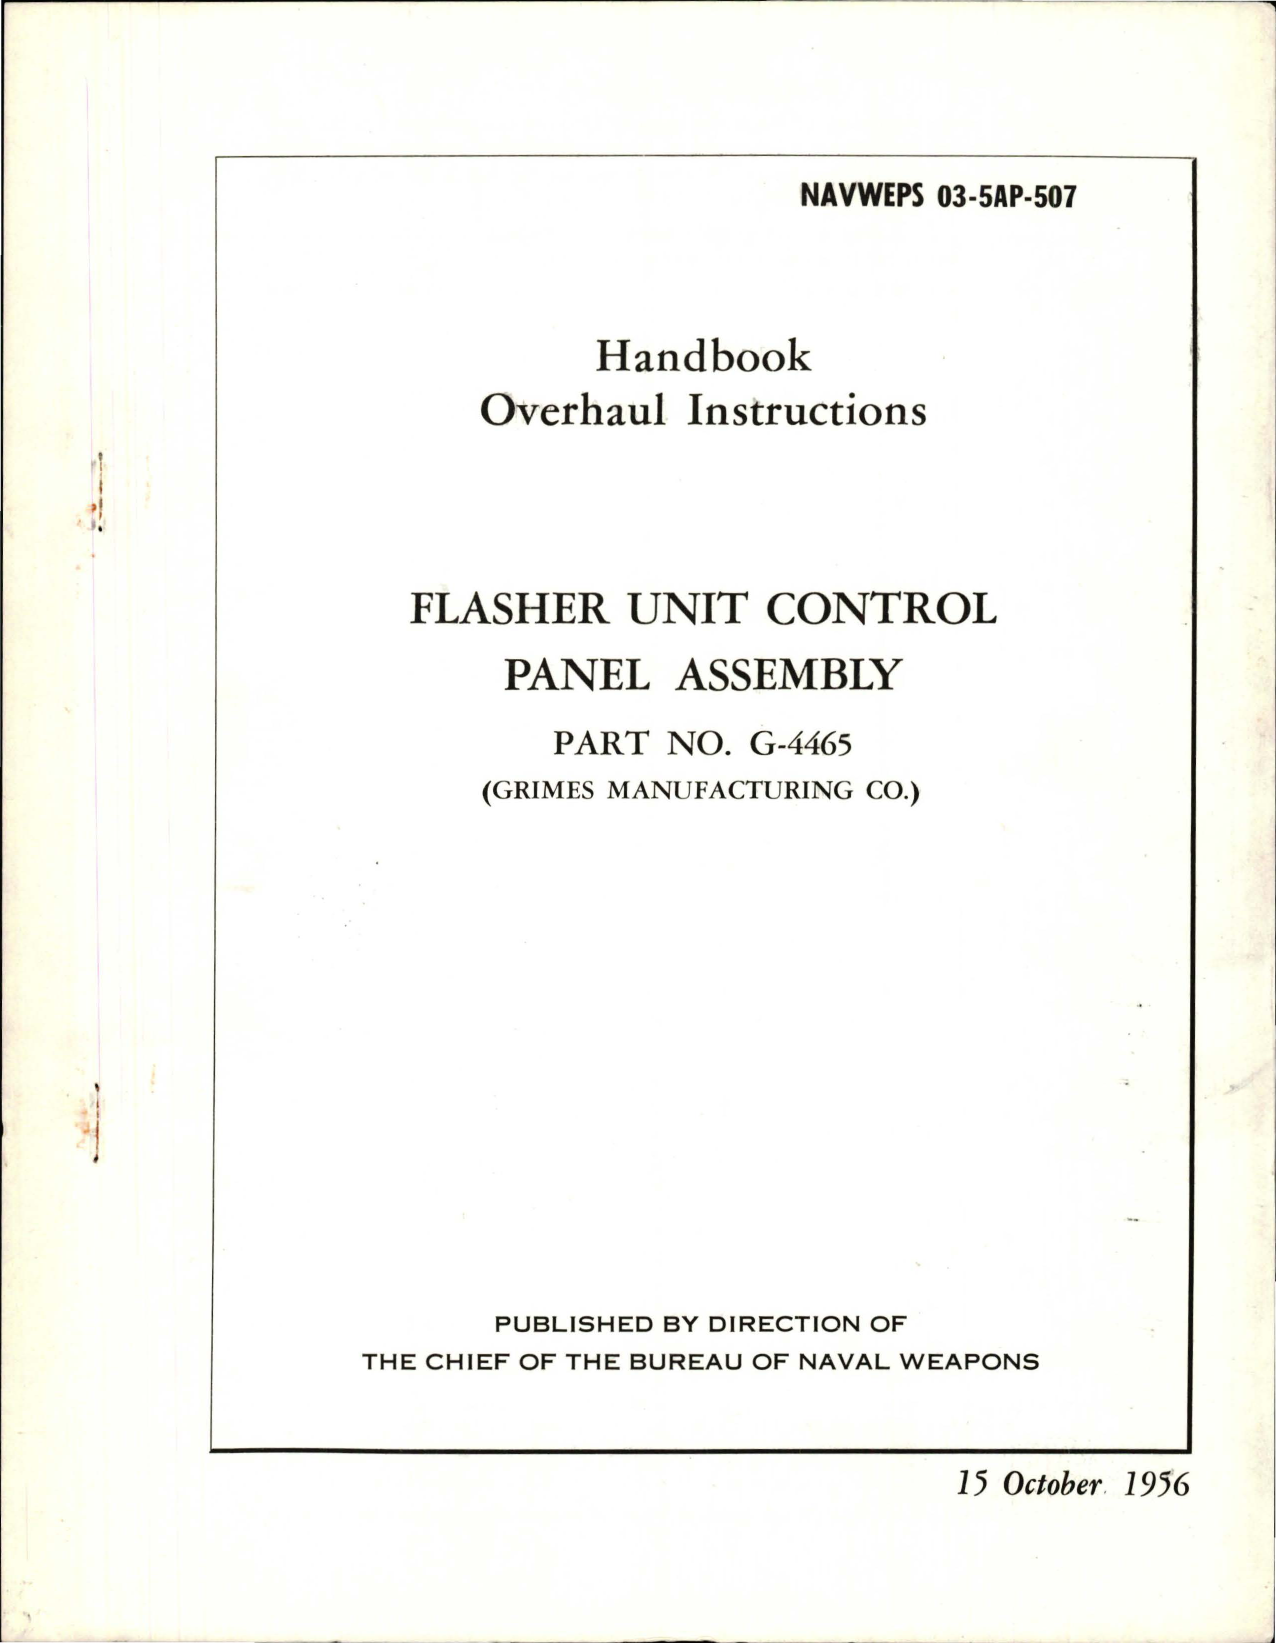 Sample page 1 from AirCorps Library document: Overhaul Instructions for Flasher Unit Control Panel Assembly - Part G-4465